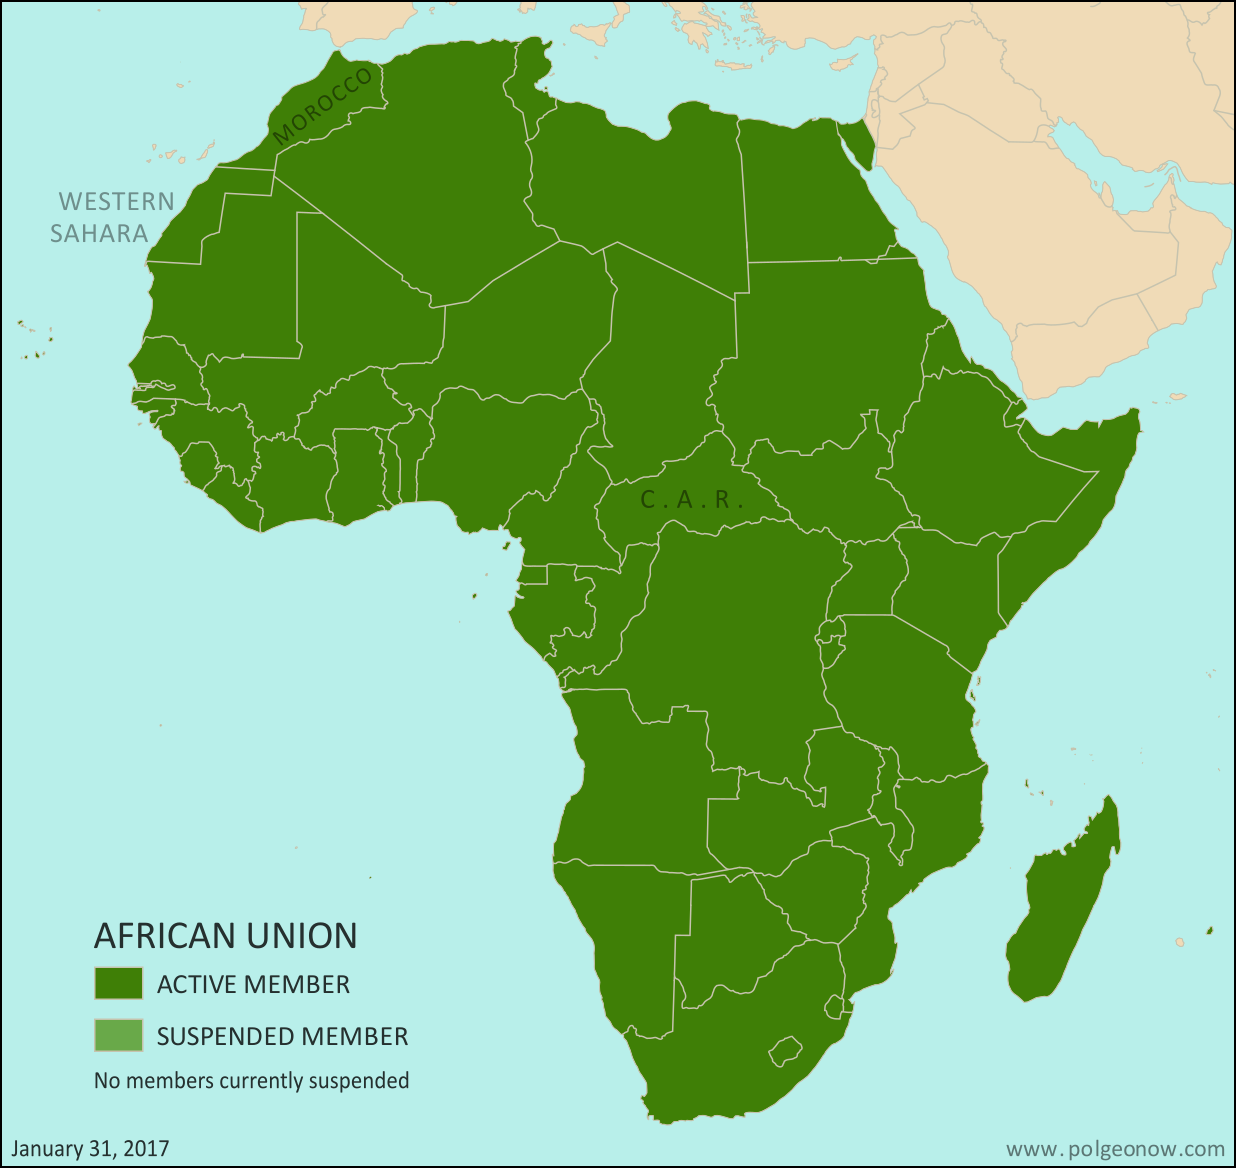 African Union: Map of Africa showing which countries are in the African Union, including active and suspended member countries, updated for the January 2017 admission of Morocco as a member, as well as the April 2016 lifting of the Central African Republic's (CAR) suspension (colorblind accessible).